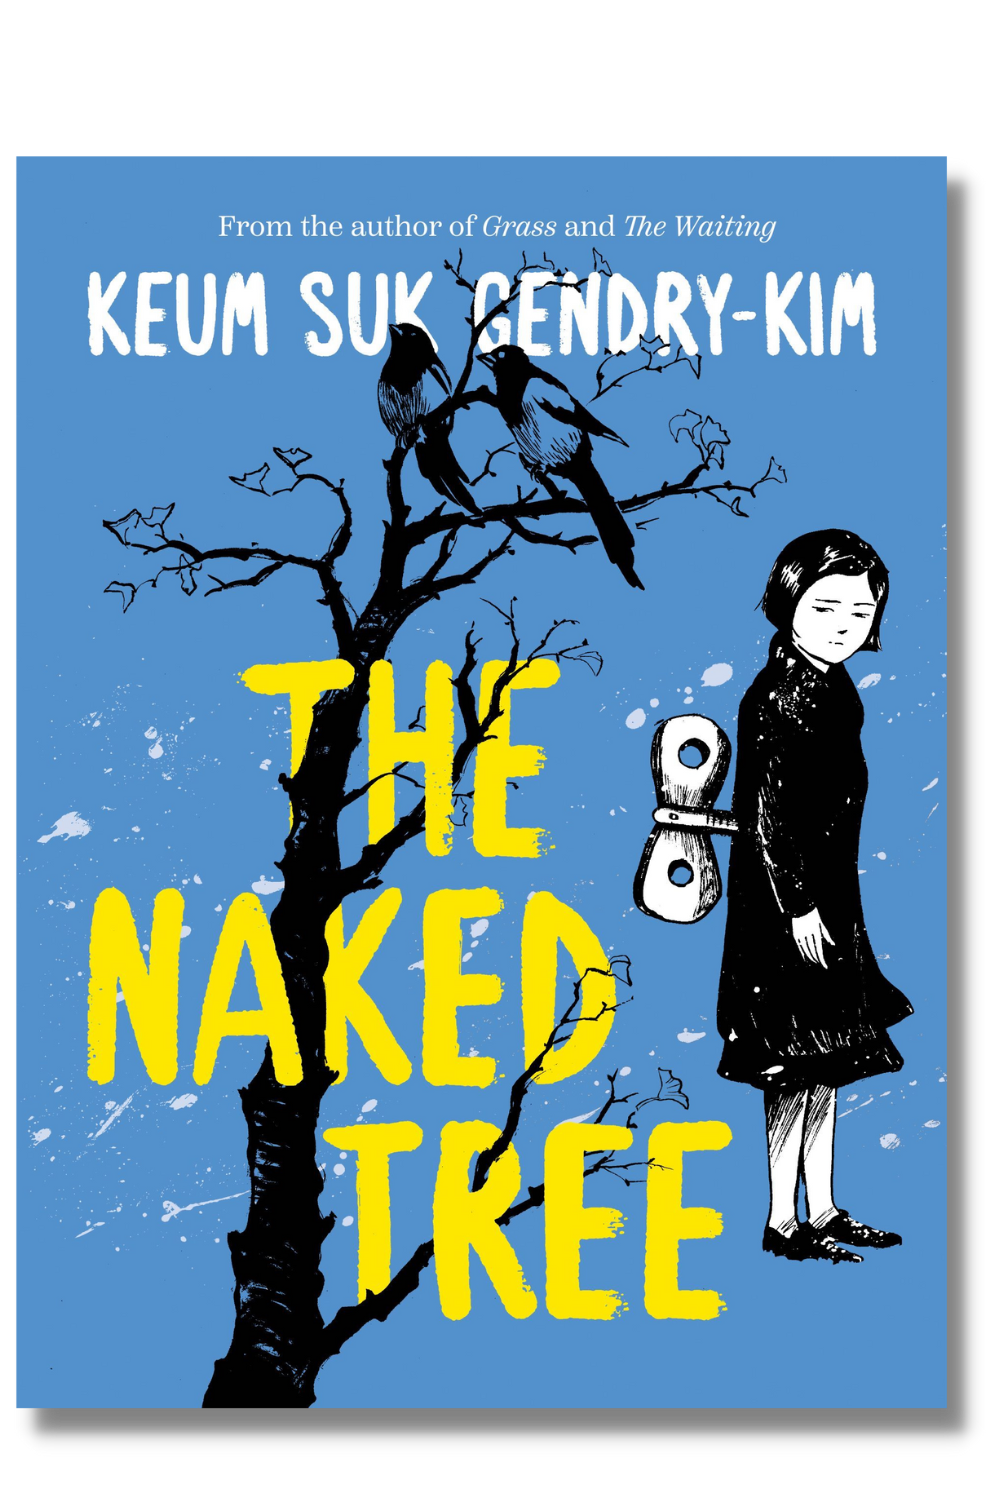 The cover of "The Naked Tree"